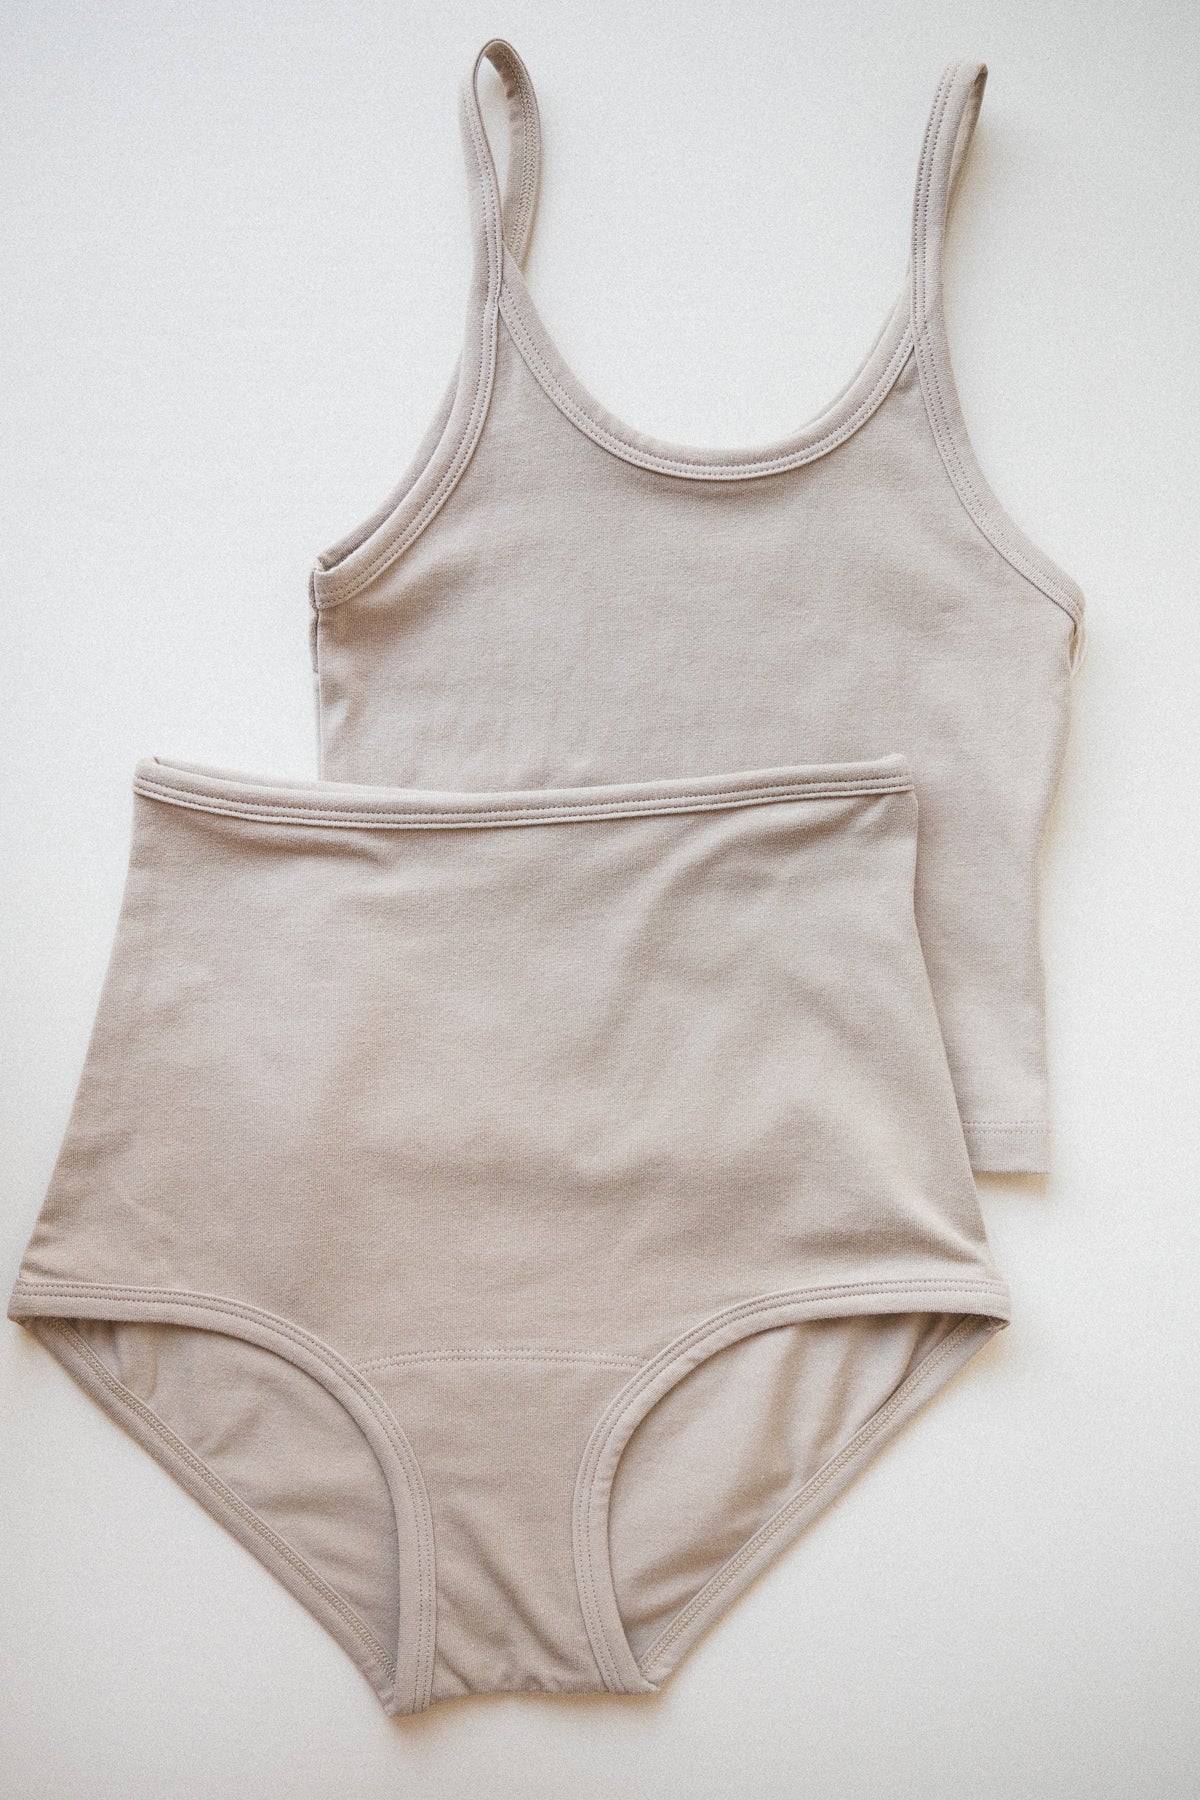 HIGH RISE UNDIES IN TAUPE